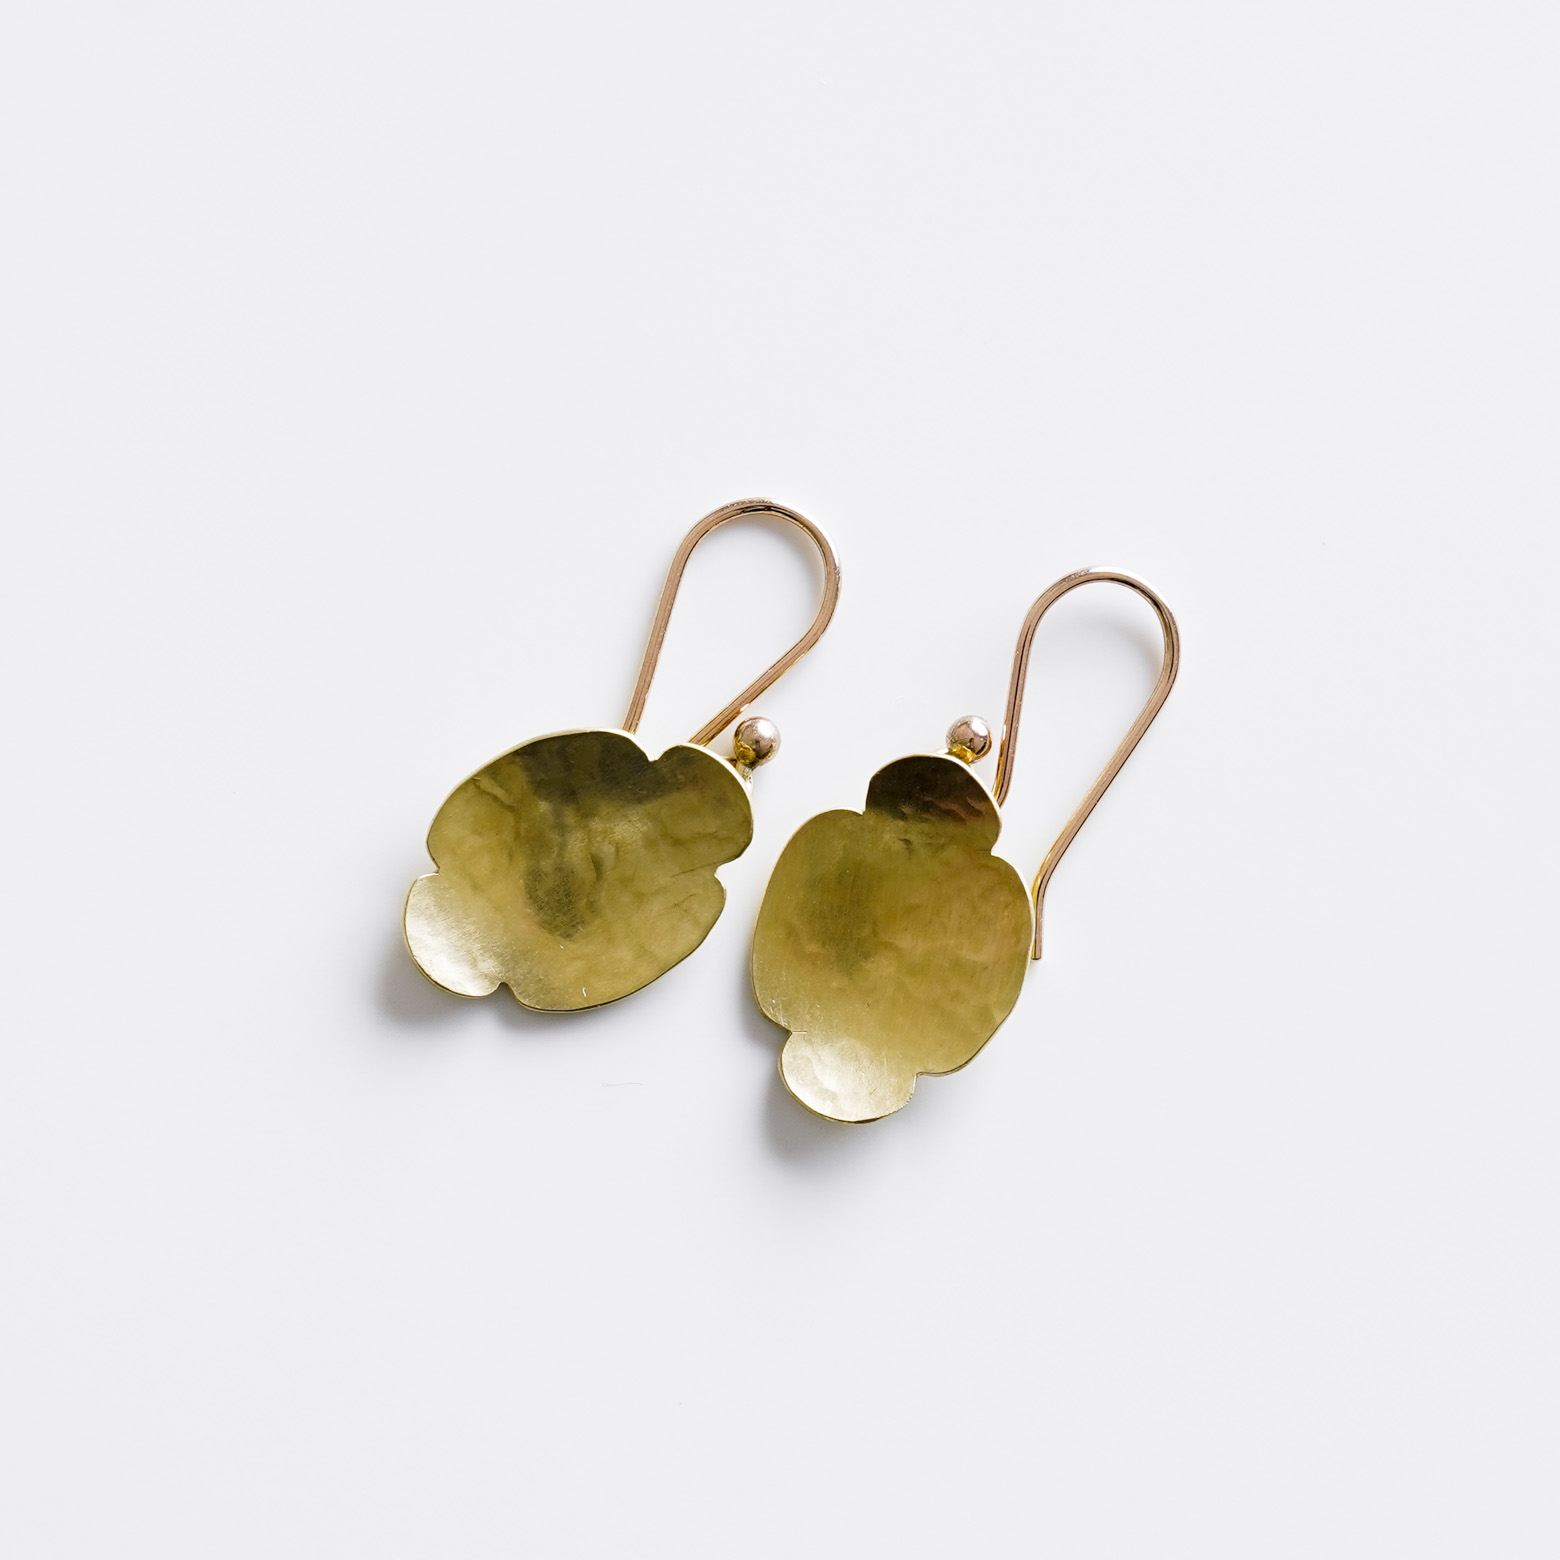 Small Hammered Scallop Earrings B (Gabriella Kiss) - SOURCE objects